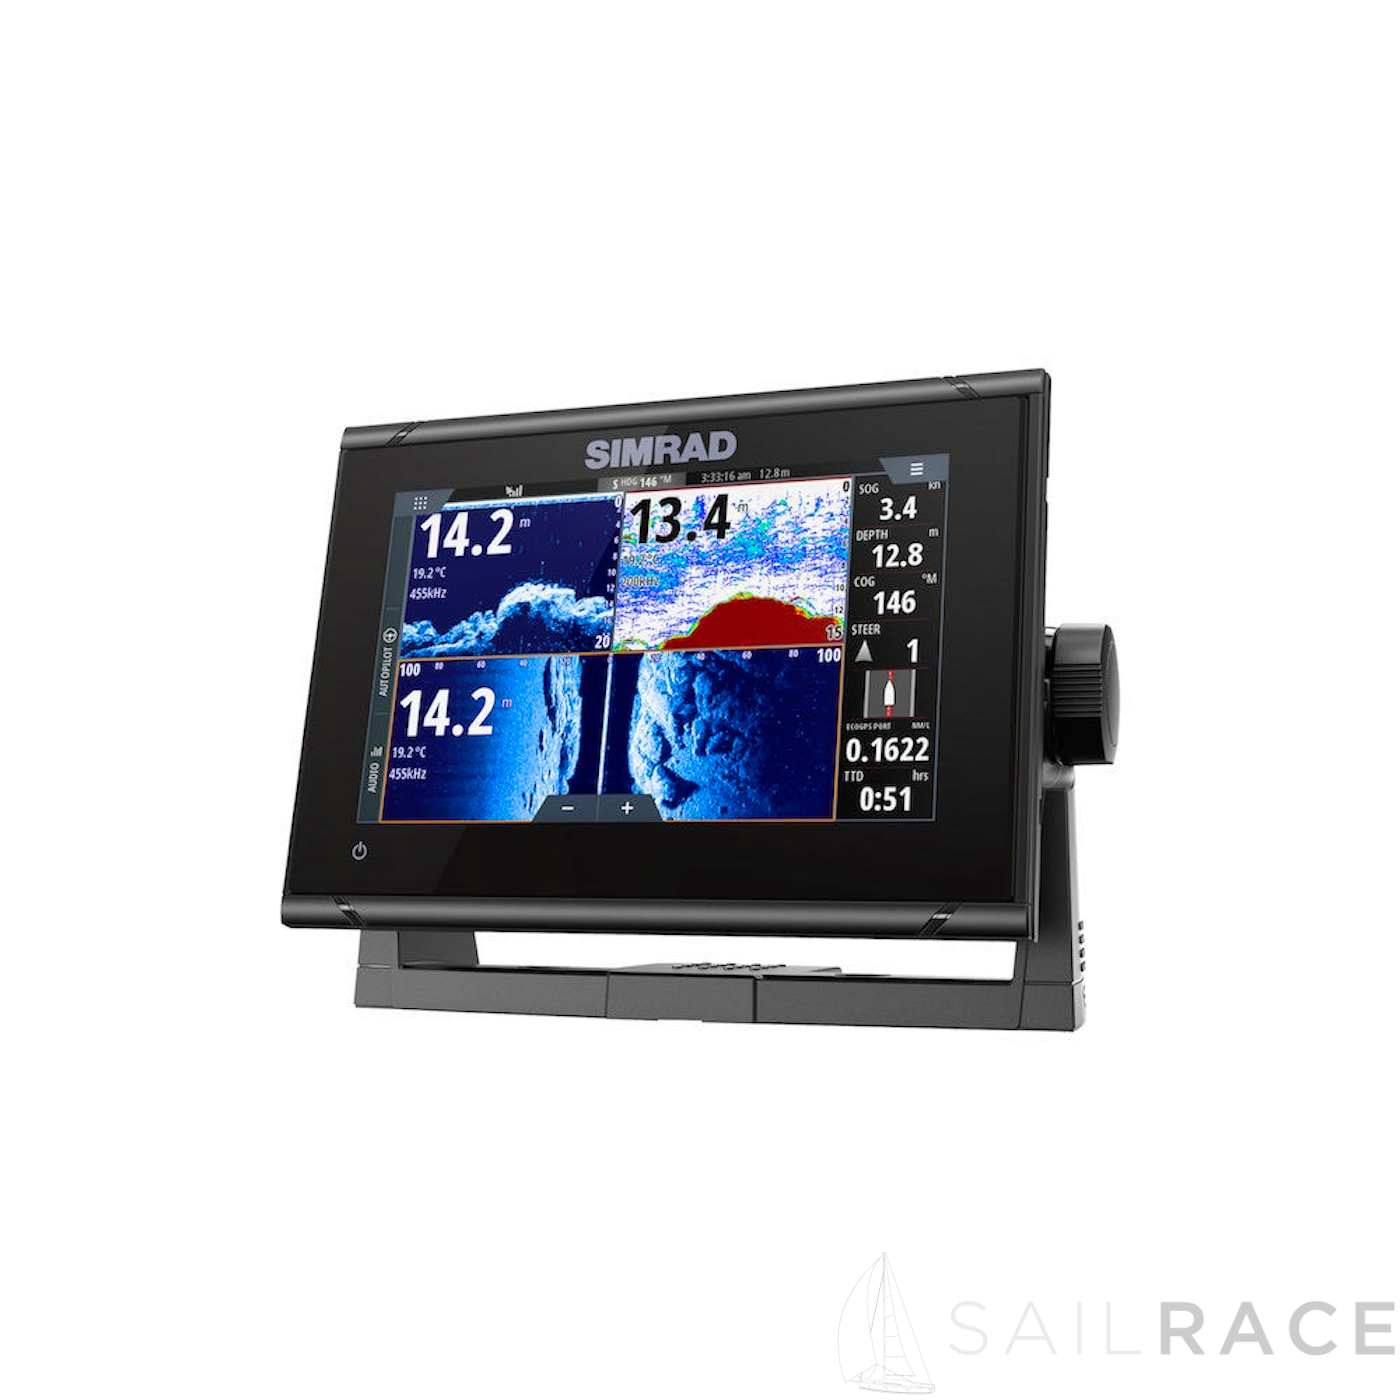 Simrad 7-inch chartplotter and radar display with TotalScan™ transducer - image 2